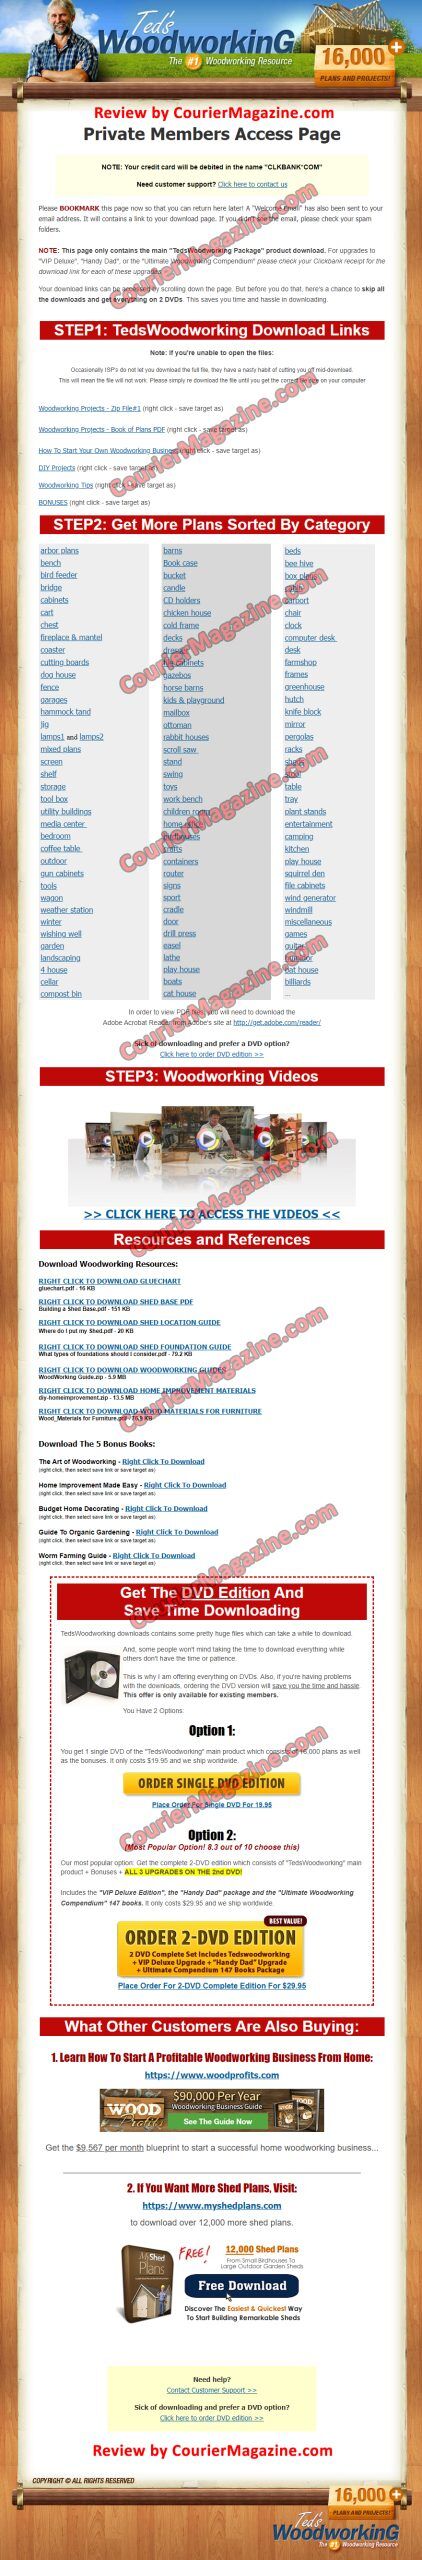 ted's woodworking 16000 plans download page